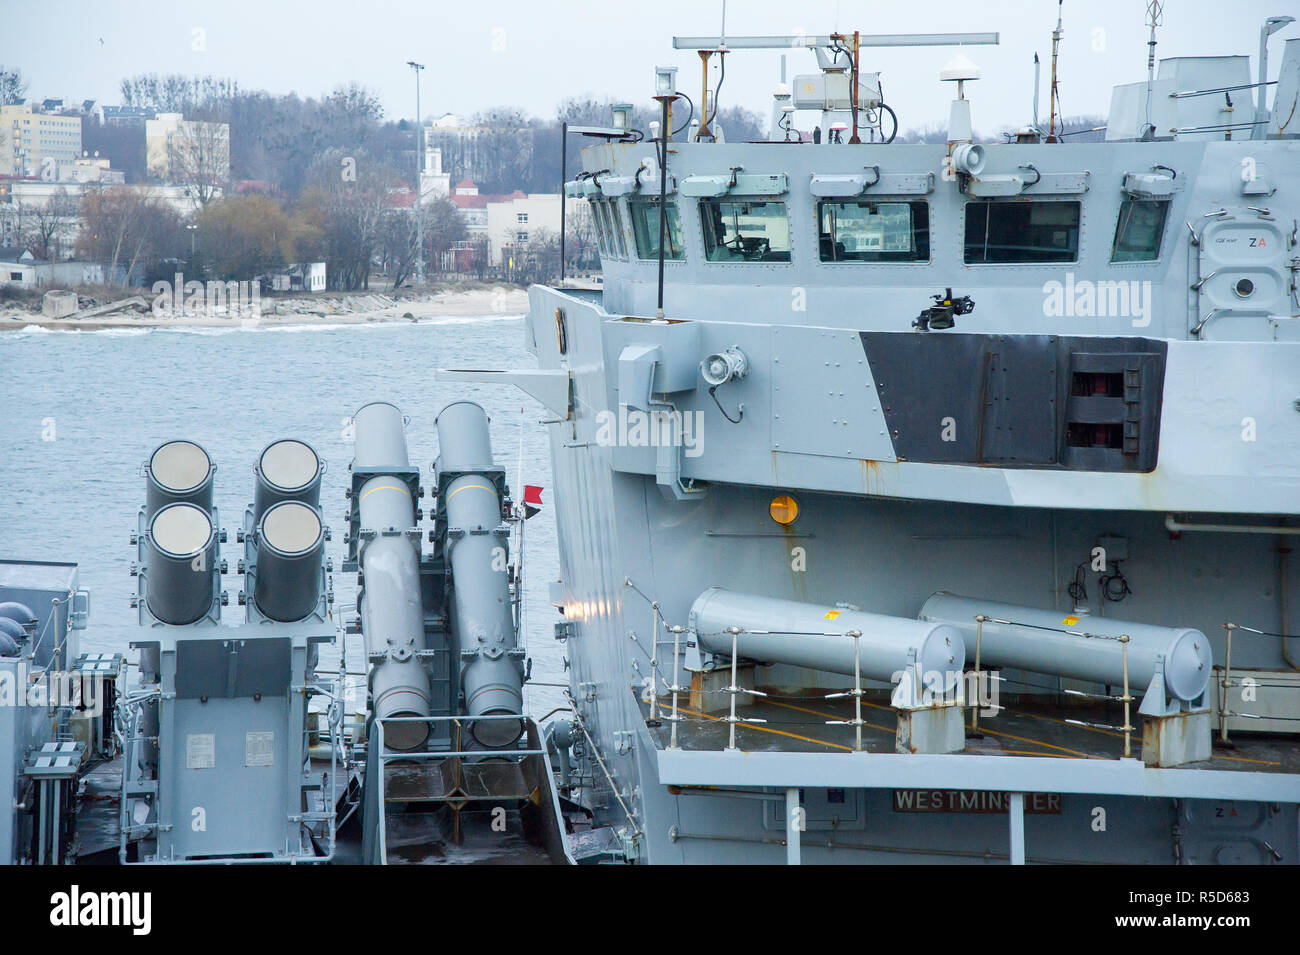 Gdynia, Poland. 30th November, 2018. RGM-84 Harpoon anti-ship missile launching system of British Type 23 frigate or Duke-class frigate HMS Westminster F237 is seen in Port of Gdynia, Poland. 30th November 2018. The vessel was used for the interior shots in the 1997 James Bond film Tomorrow Never Dies © Wojciech Strozyk / Alamy Live News Stock Photo